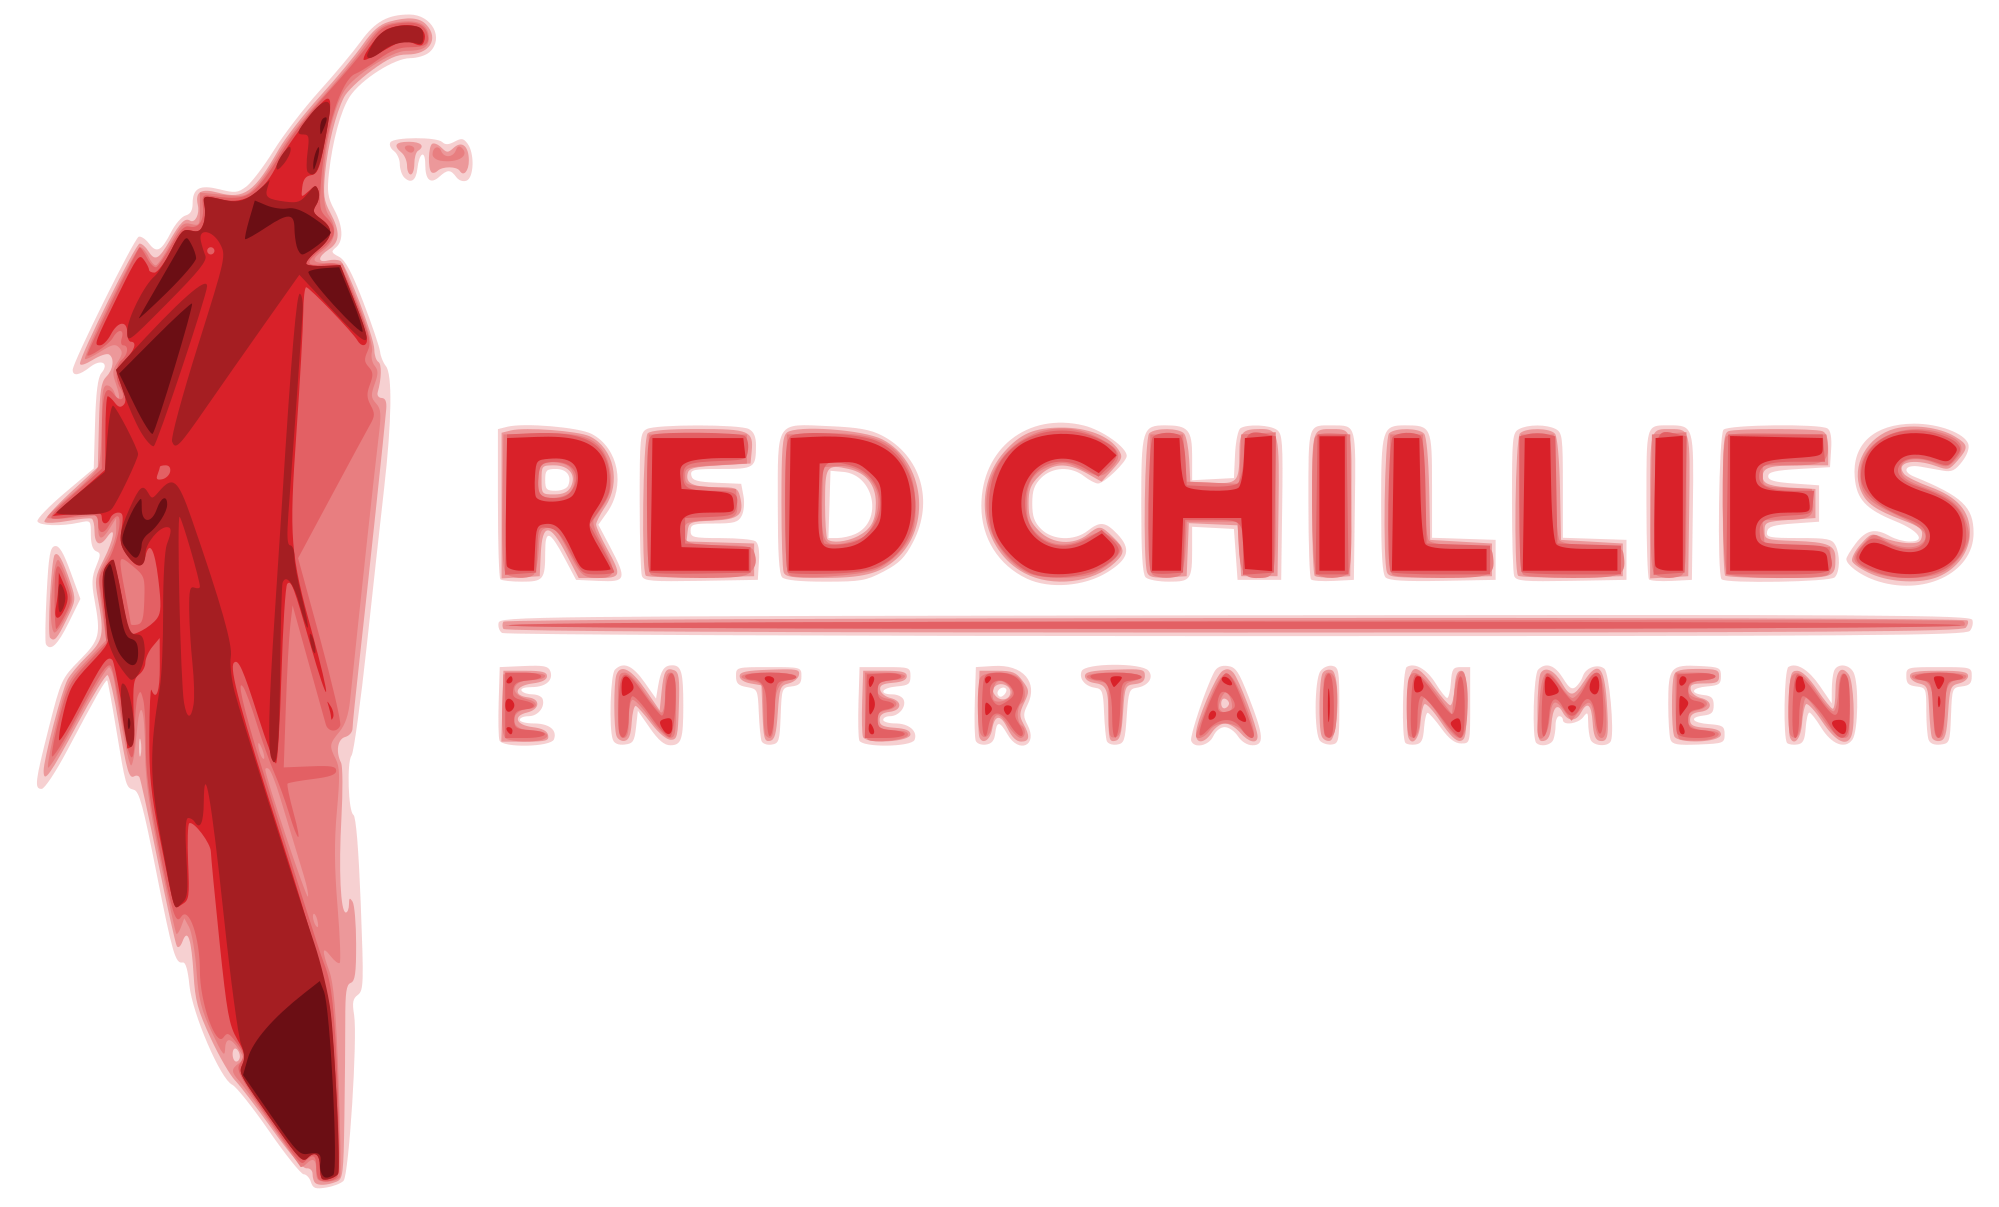 Red Chillies Entertainment - company